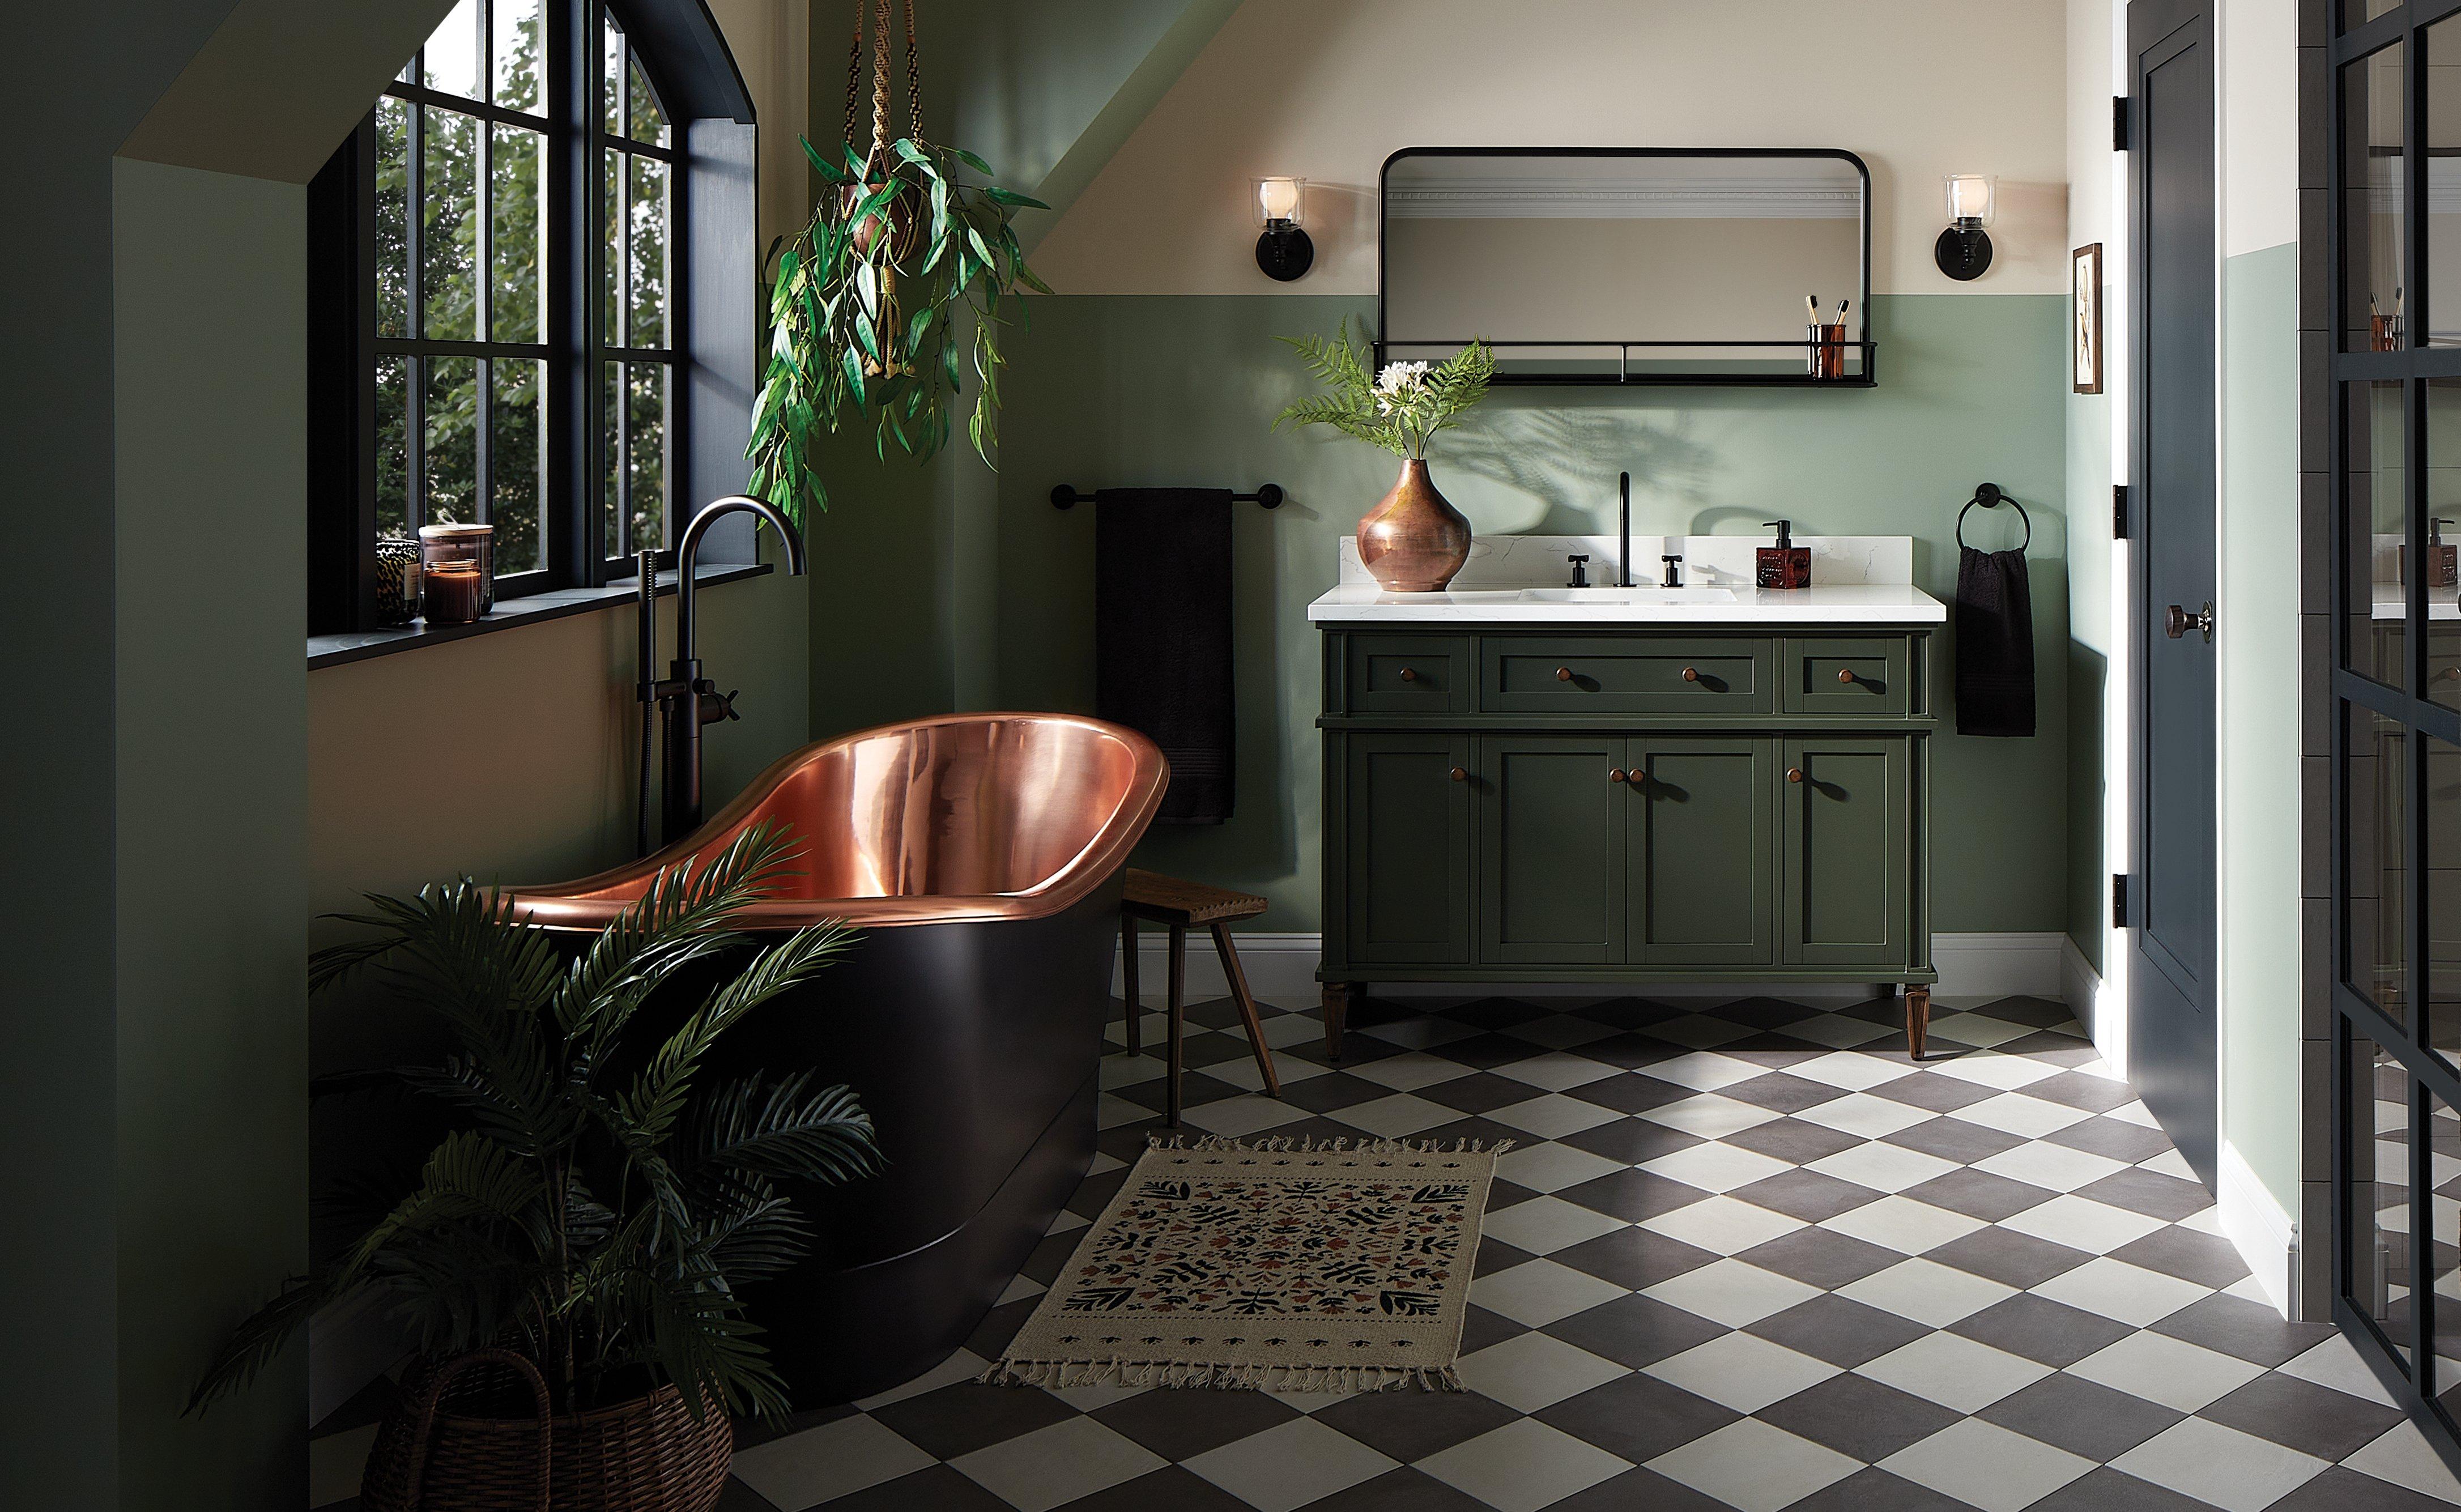 Moody bathroom with the 48" Elmdale in Olive Green, 70" Thaine Black Copper Tub, Vassor Widespread Faucet in Matte Black